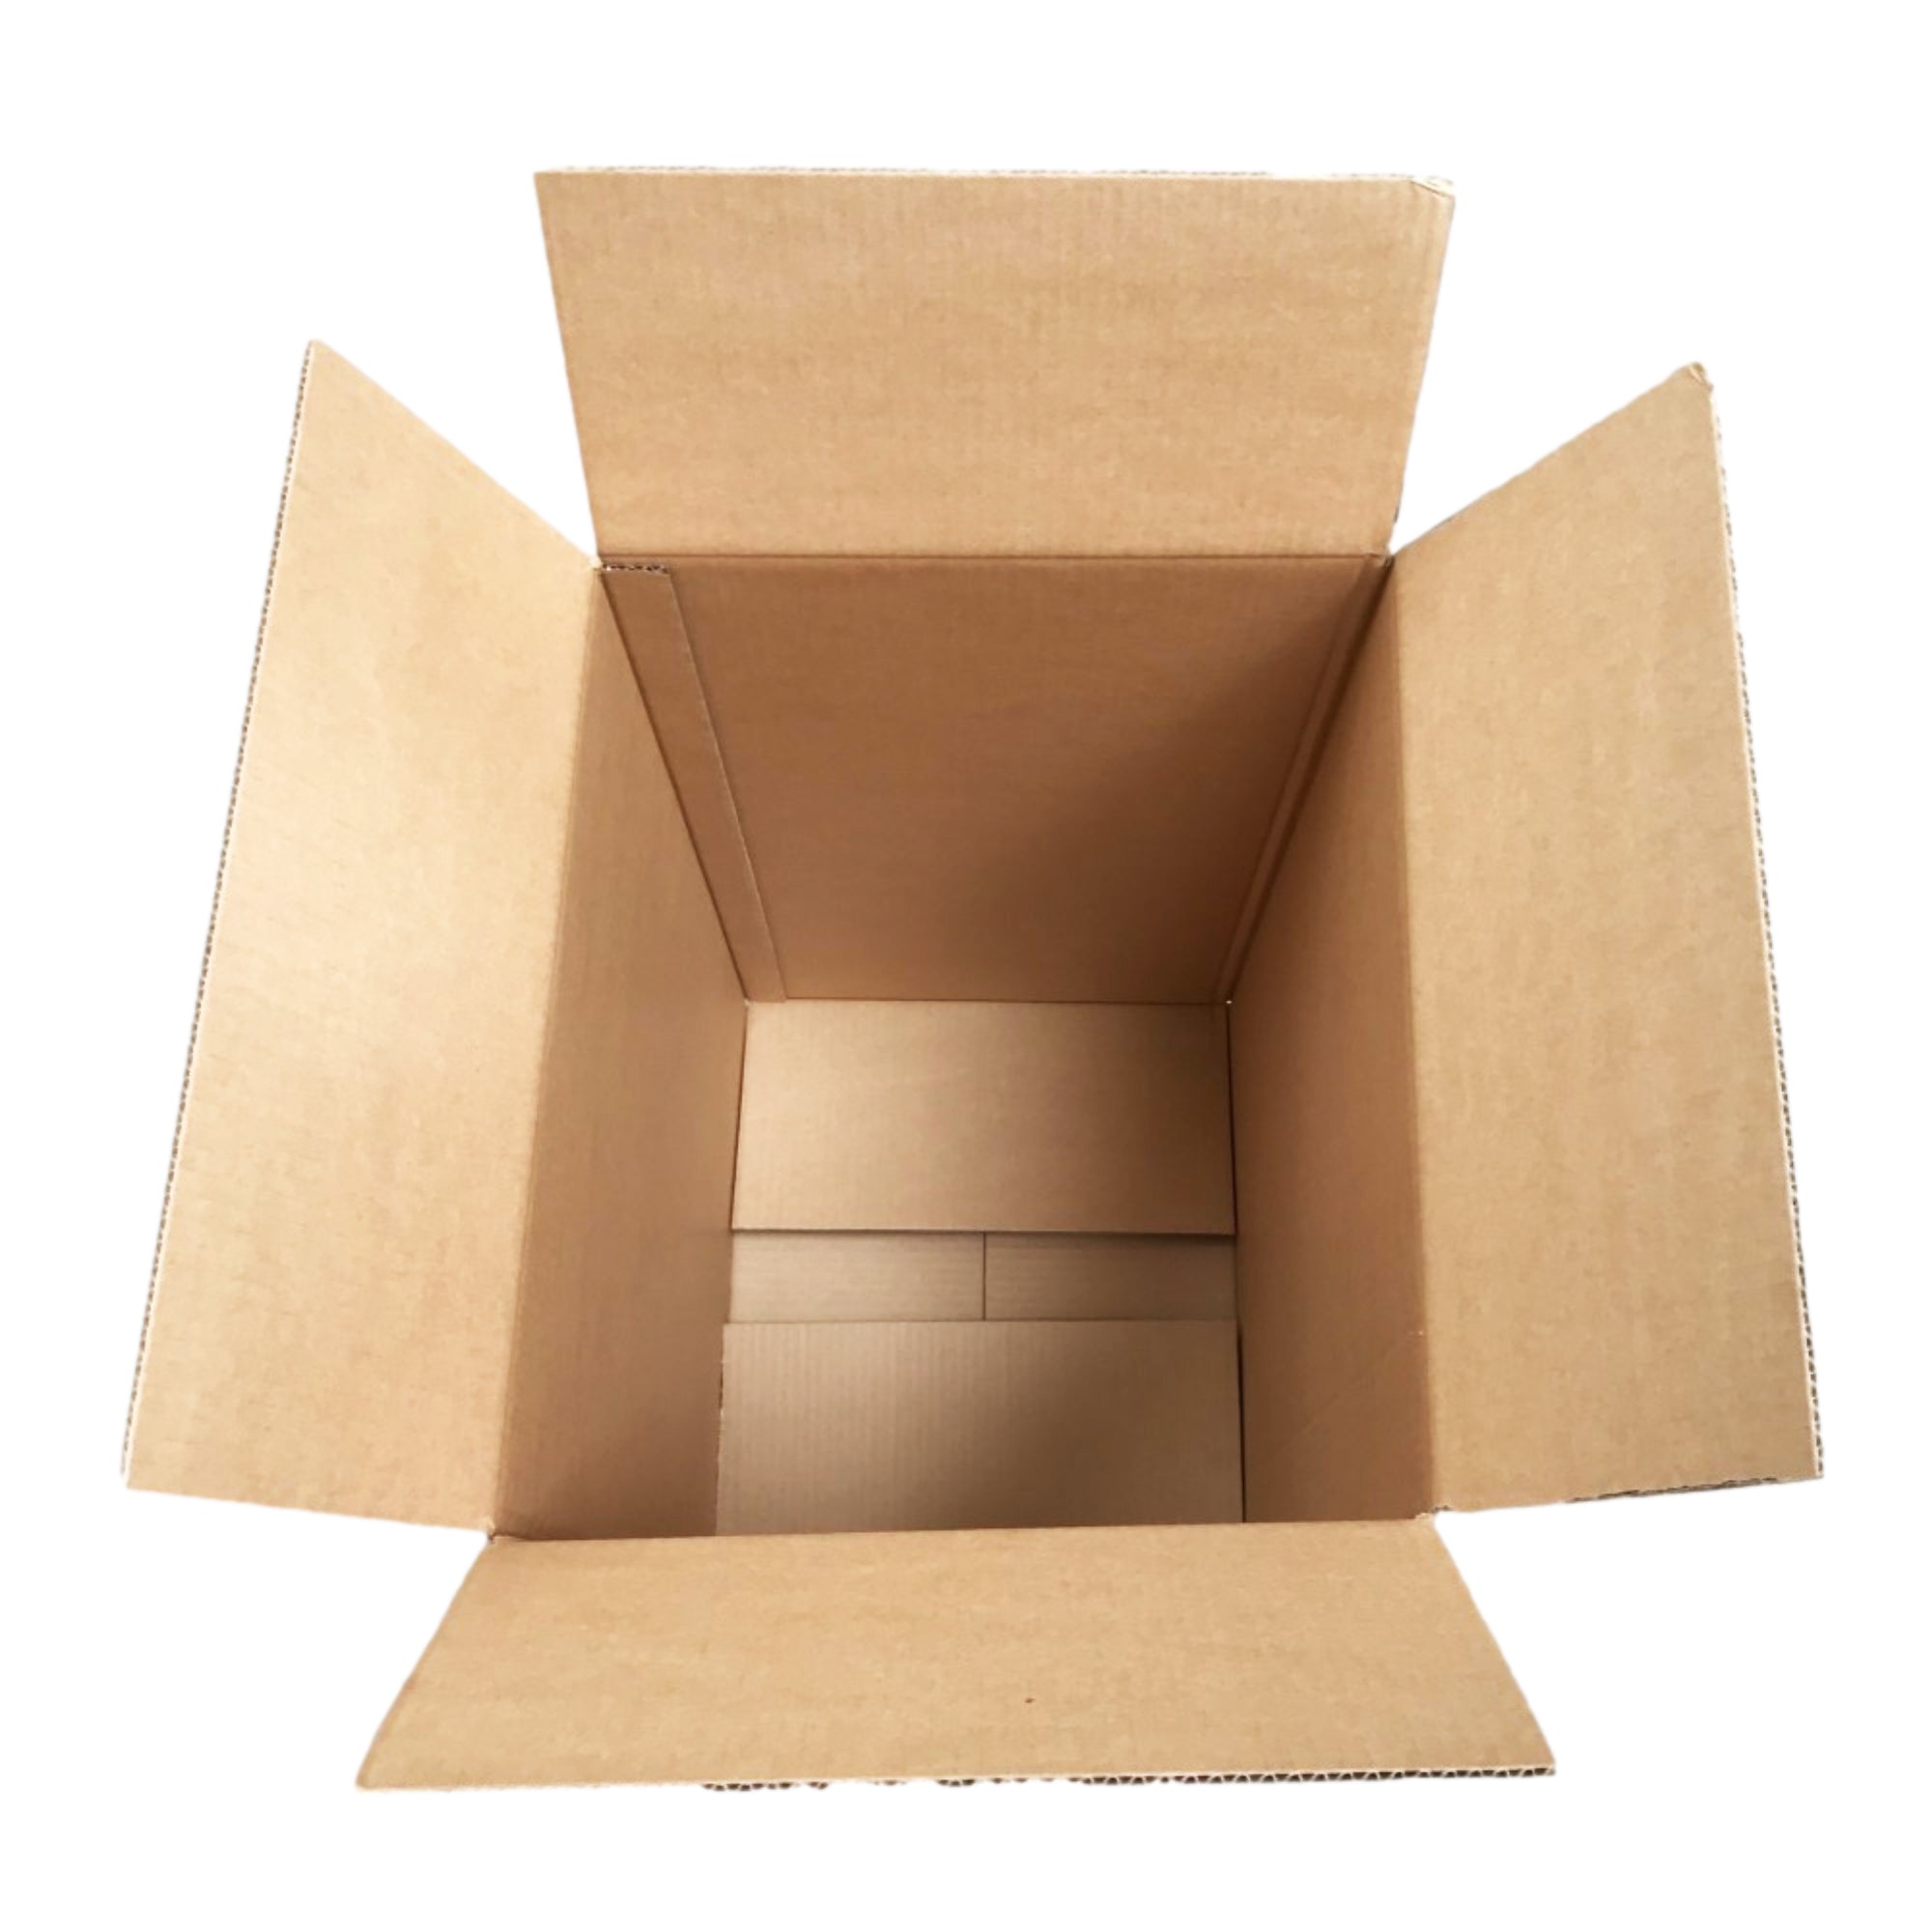 Regular Slotted Cardboard Box 430 x 370 x 640mm 100 Litre Capacity [RSC Shipping Carton] [Tea Chest Moving Boxes]